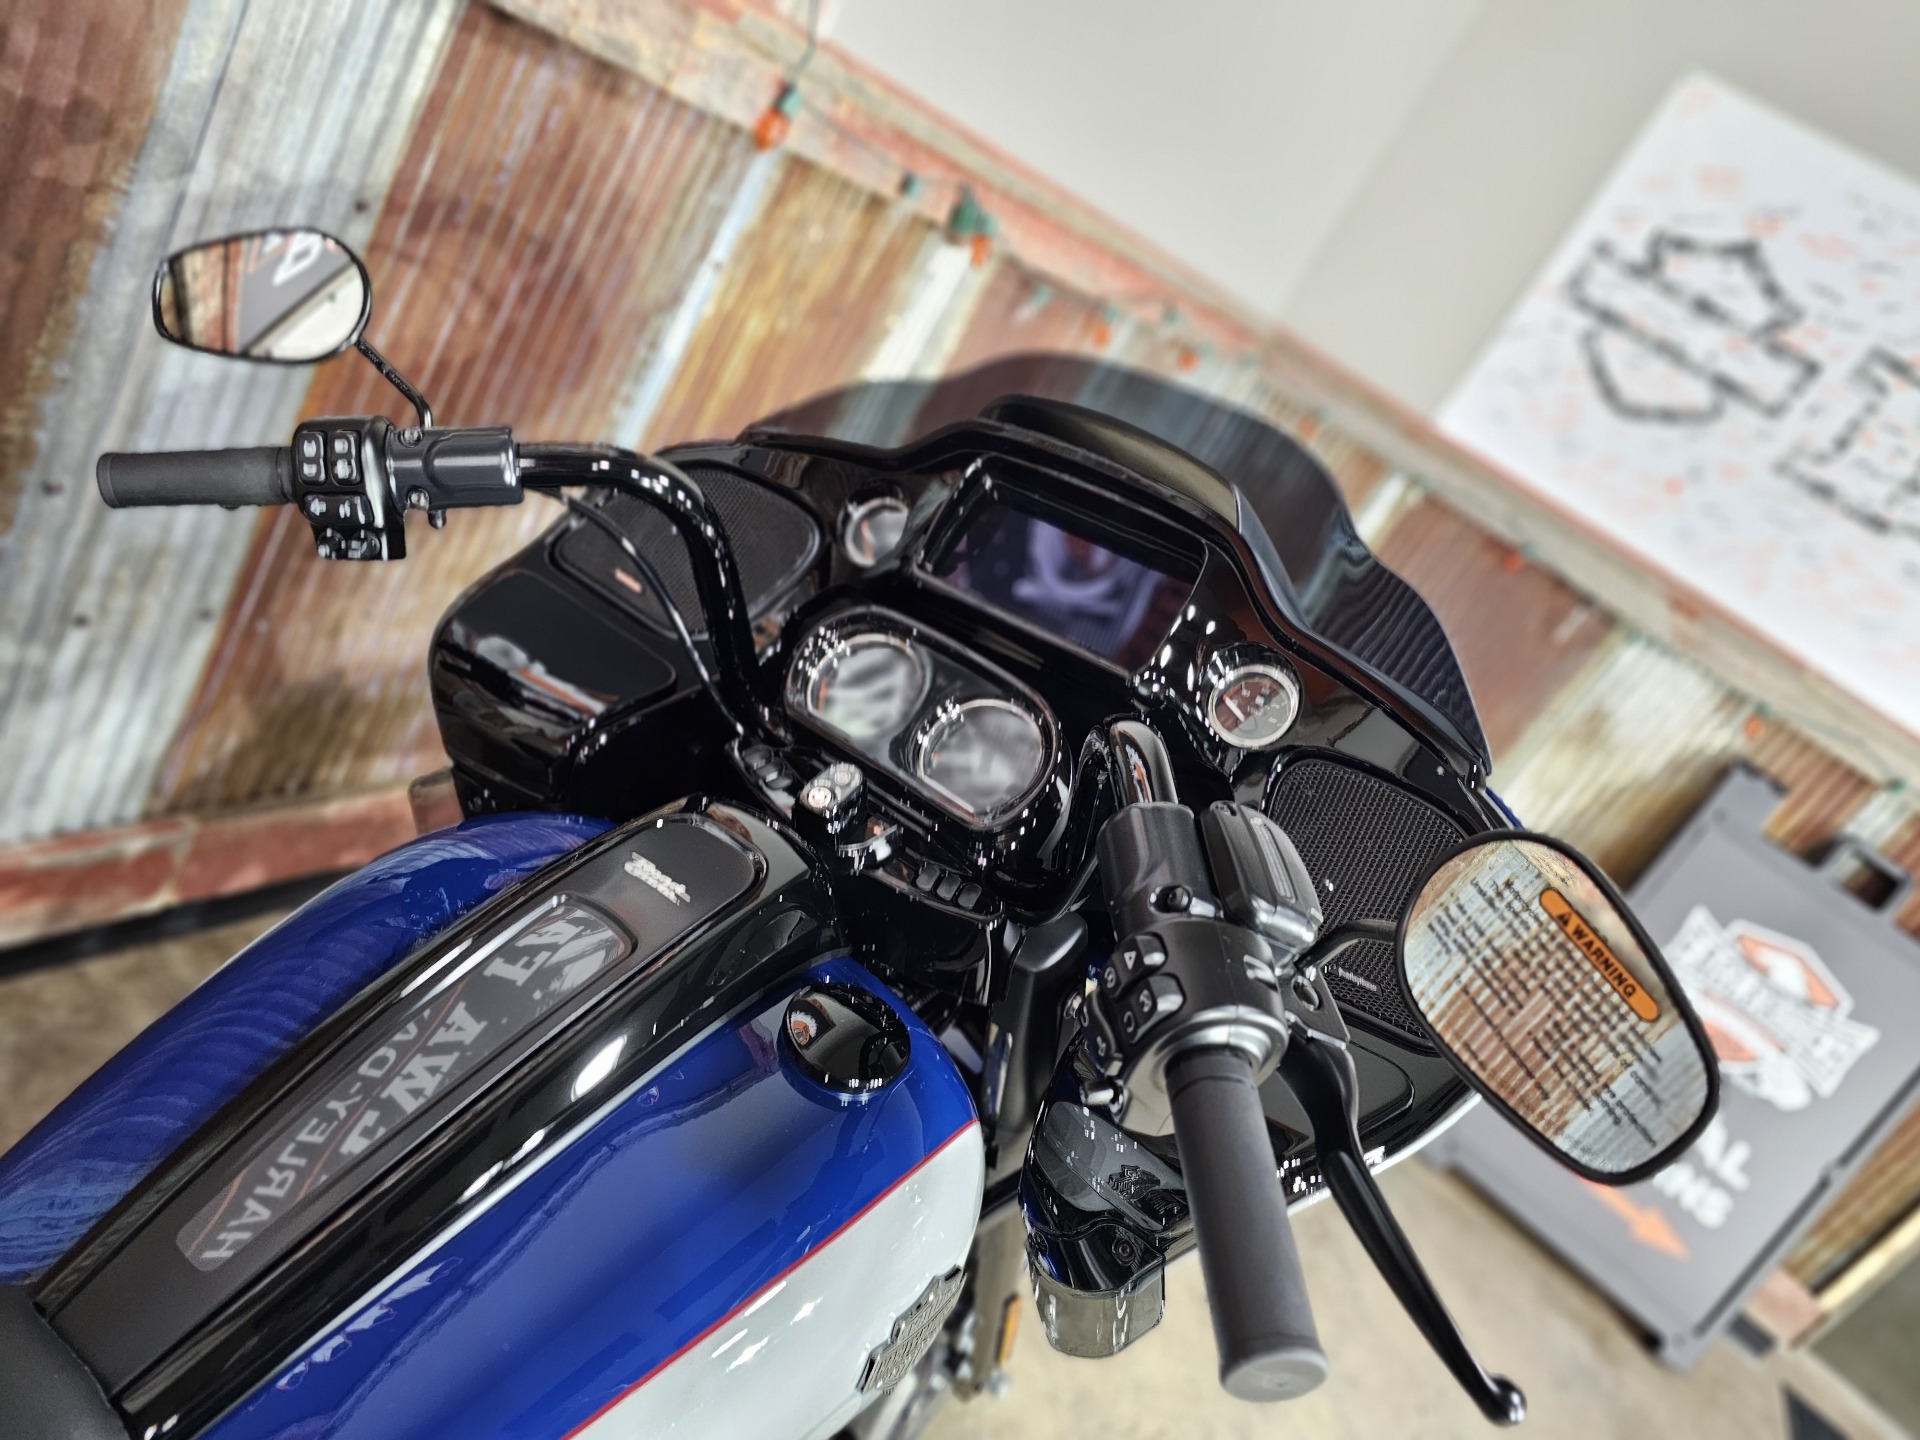 2023 Harley-Davidson Road Glide® Special in Chippewa Falls, Wisconsin - Photo 11